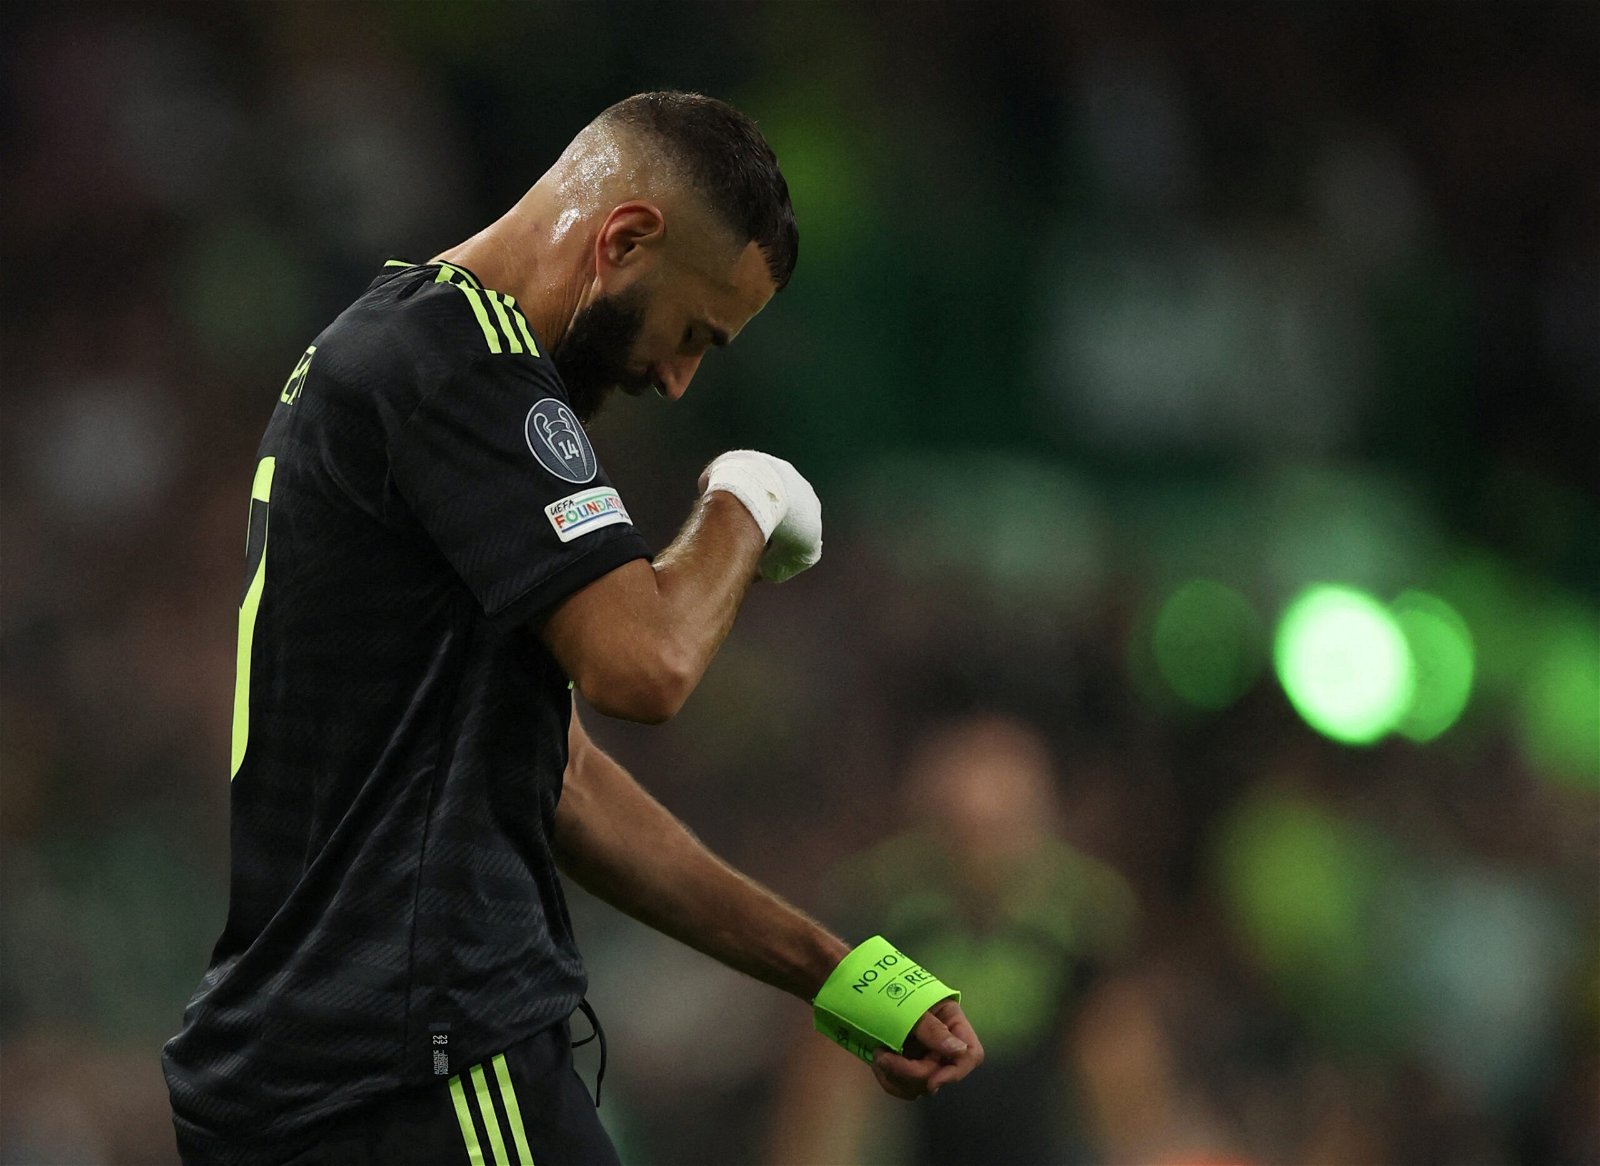 Karim Benzema expected to be available for Madrid derby